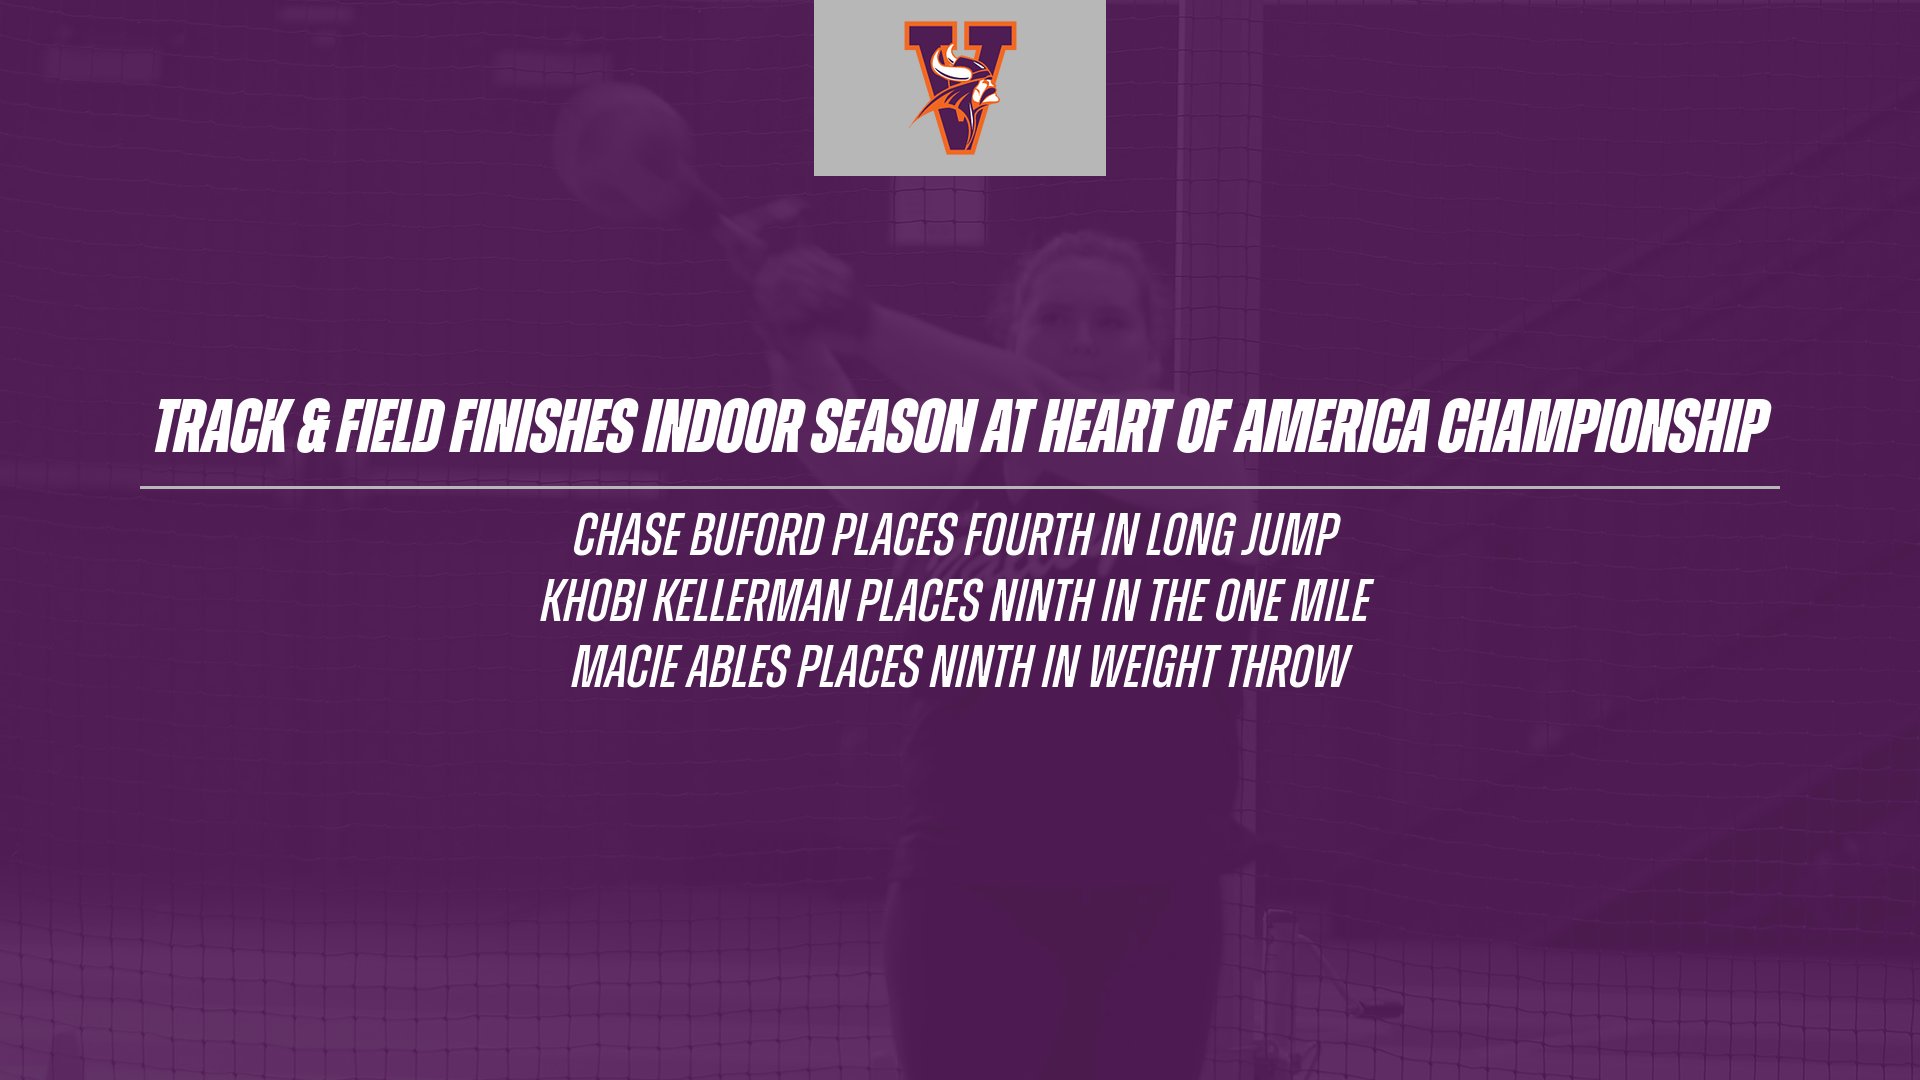 MISSOURI VALLEY COLLEGE TRACK AND FIELD TEAMS FINISHES THEIR INDOOR SEASON AT THE HEART OF AMERICA INDOOR CHAMPIONSHIPS.